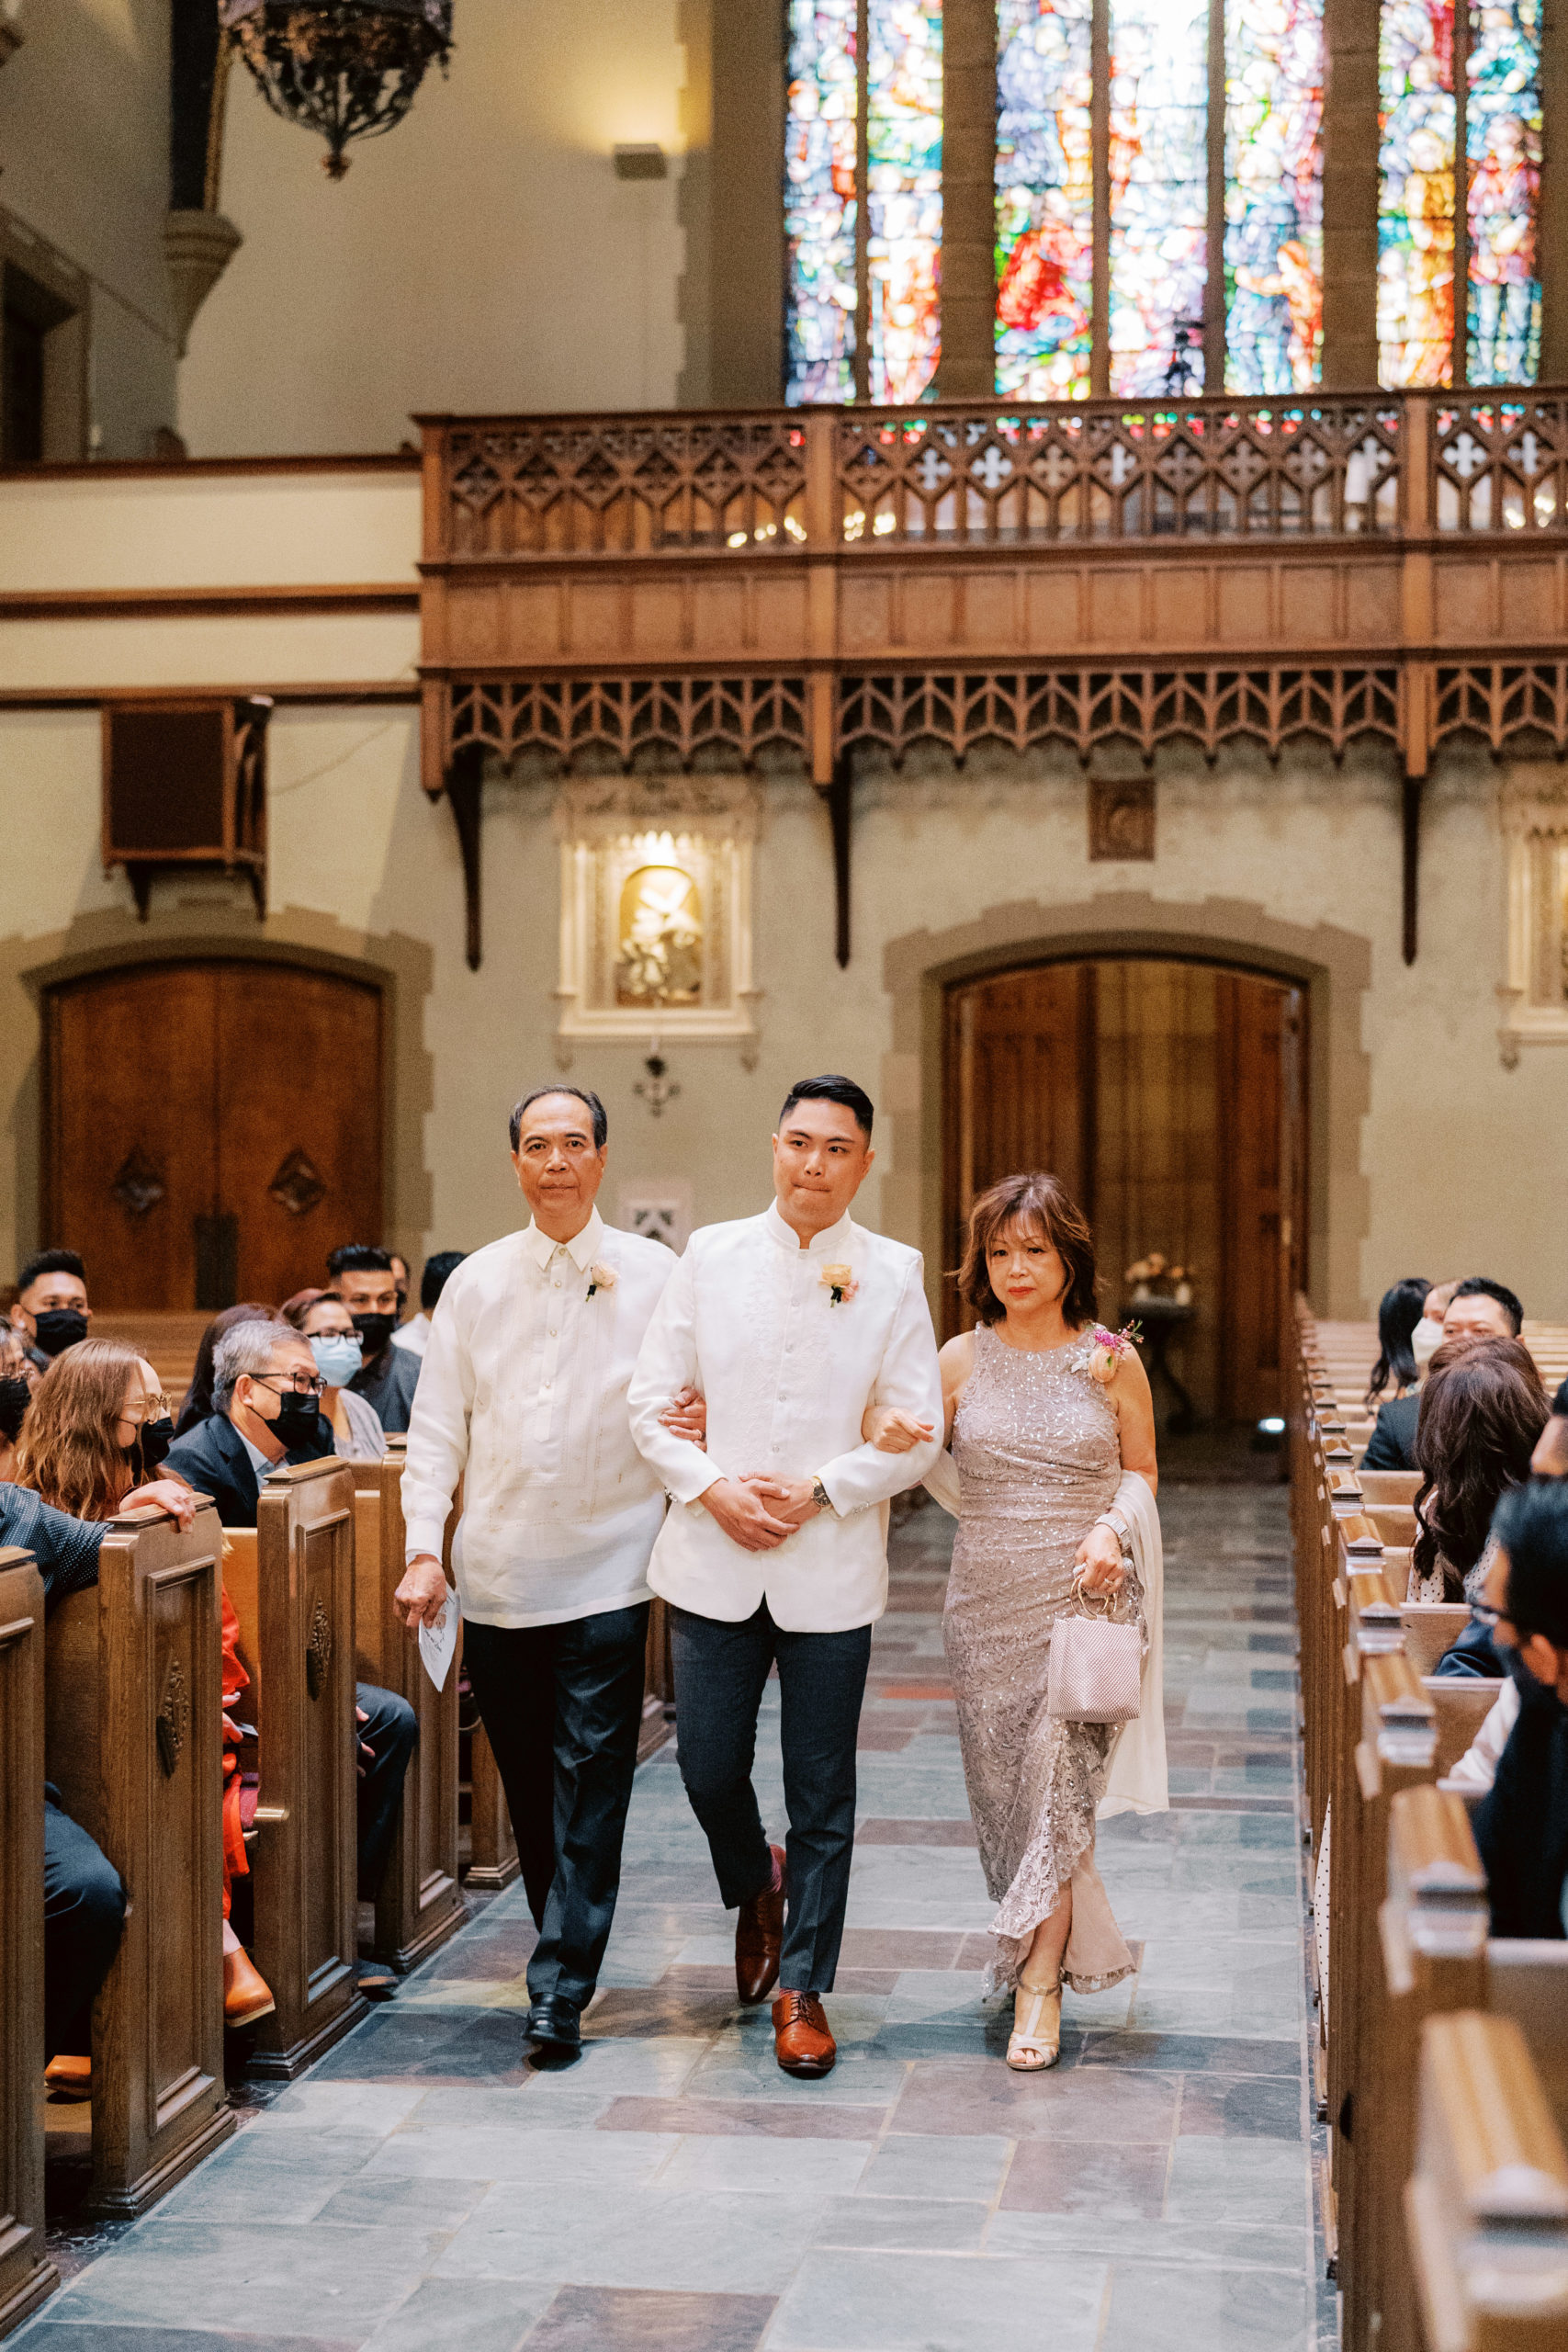 groom with mother and father walk down aisle in church wedding ceremony